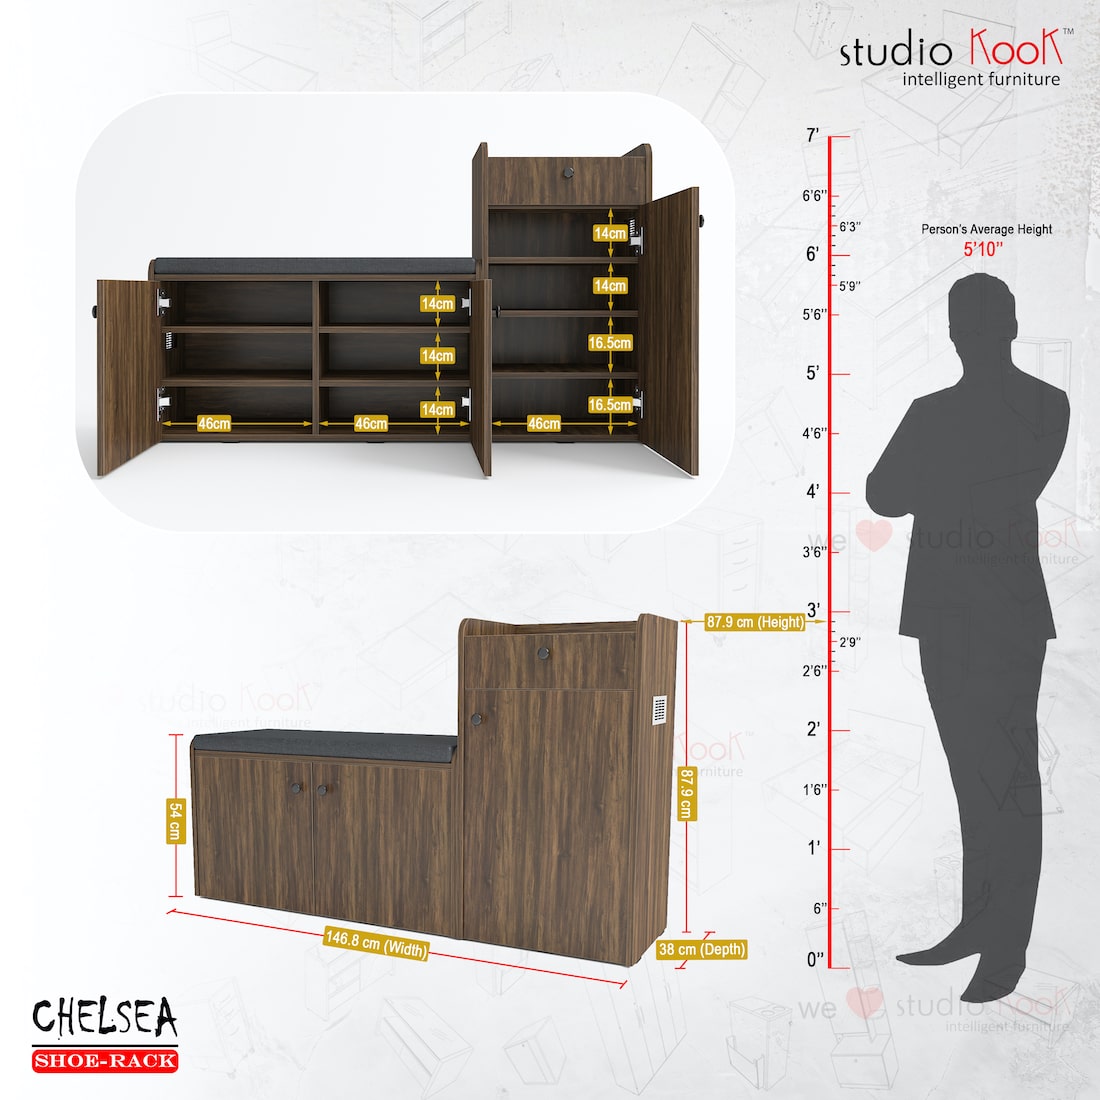 Chelsea Shoerack || Shoe Cabinet with Cushion Seating and 20 pairs capacity